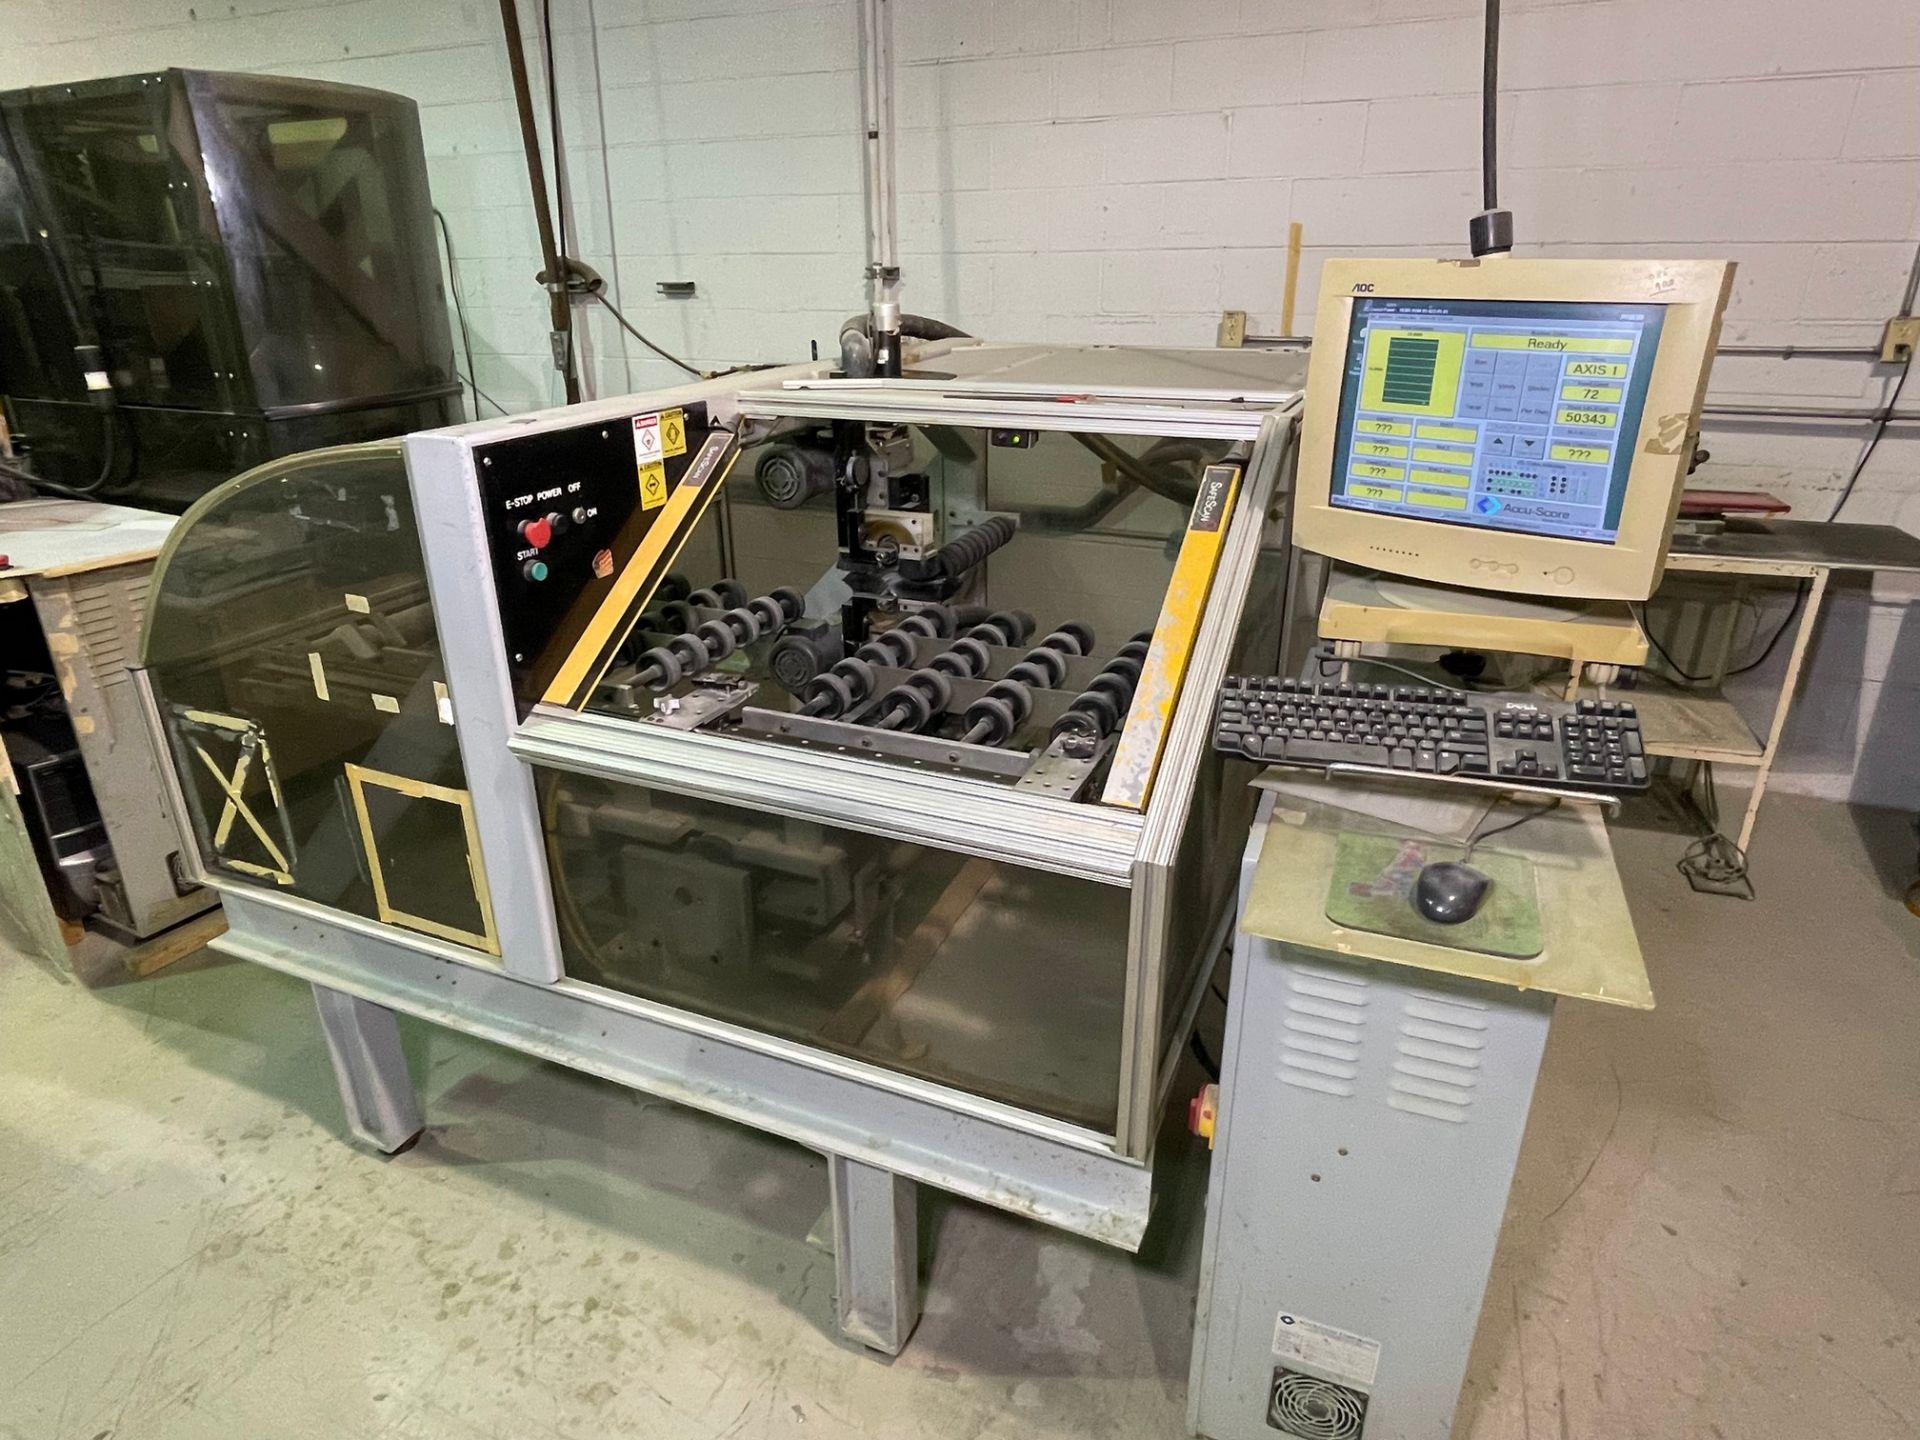 ACCUSYSTEMS ACCUSCORE AS-150-JE CNC V-SCORING SYSTEM, 200 FPM FEED RATE, POWER SOURCE: 235 VAC, 50/